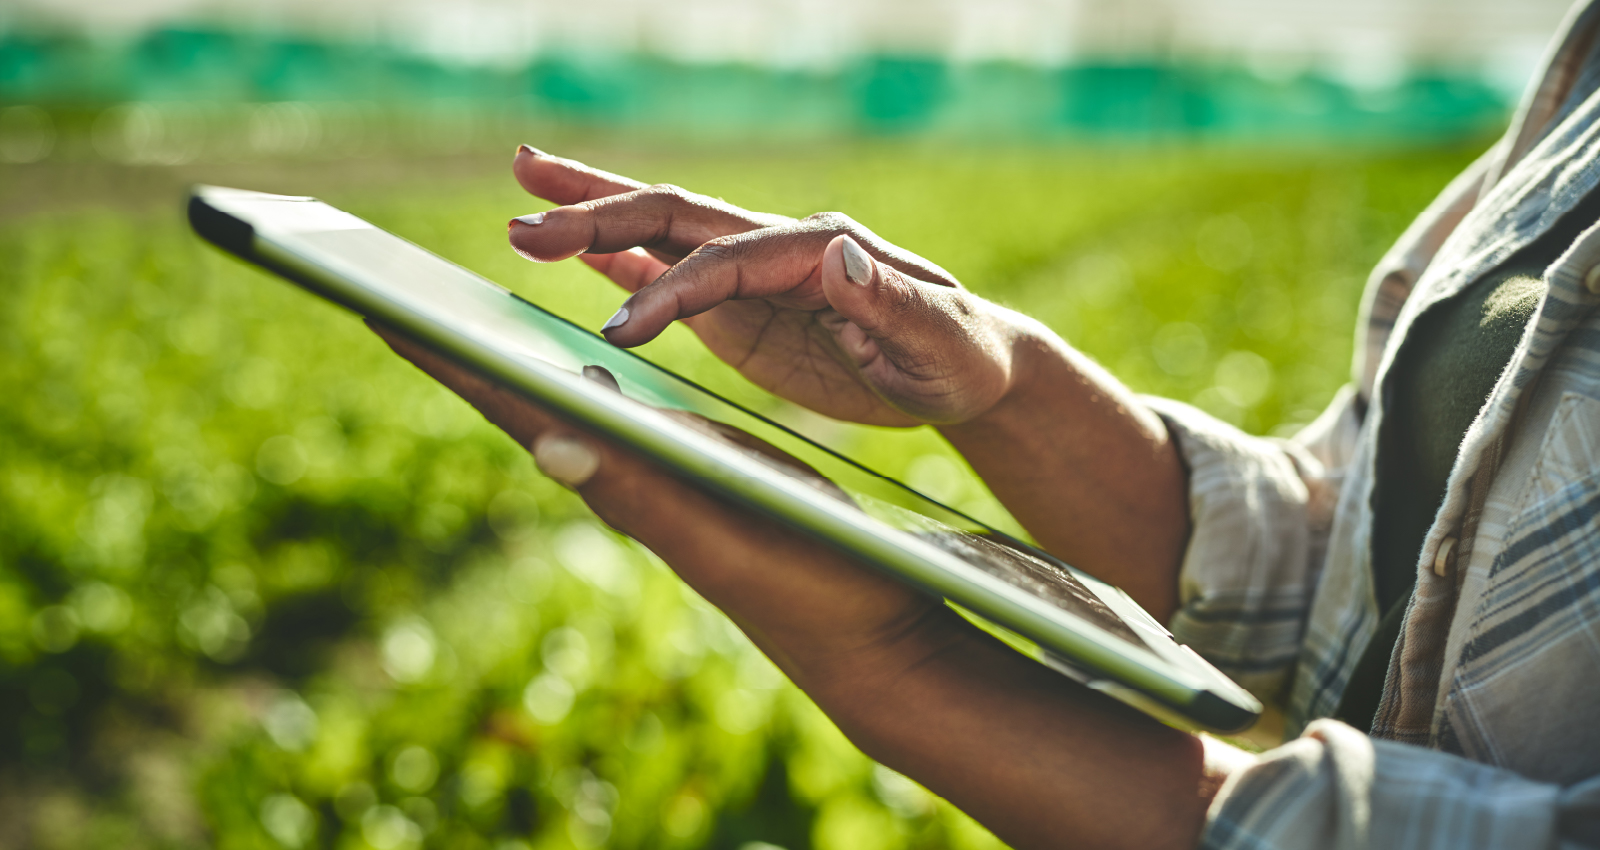 Using ERP software on iPad in growing field